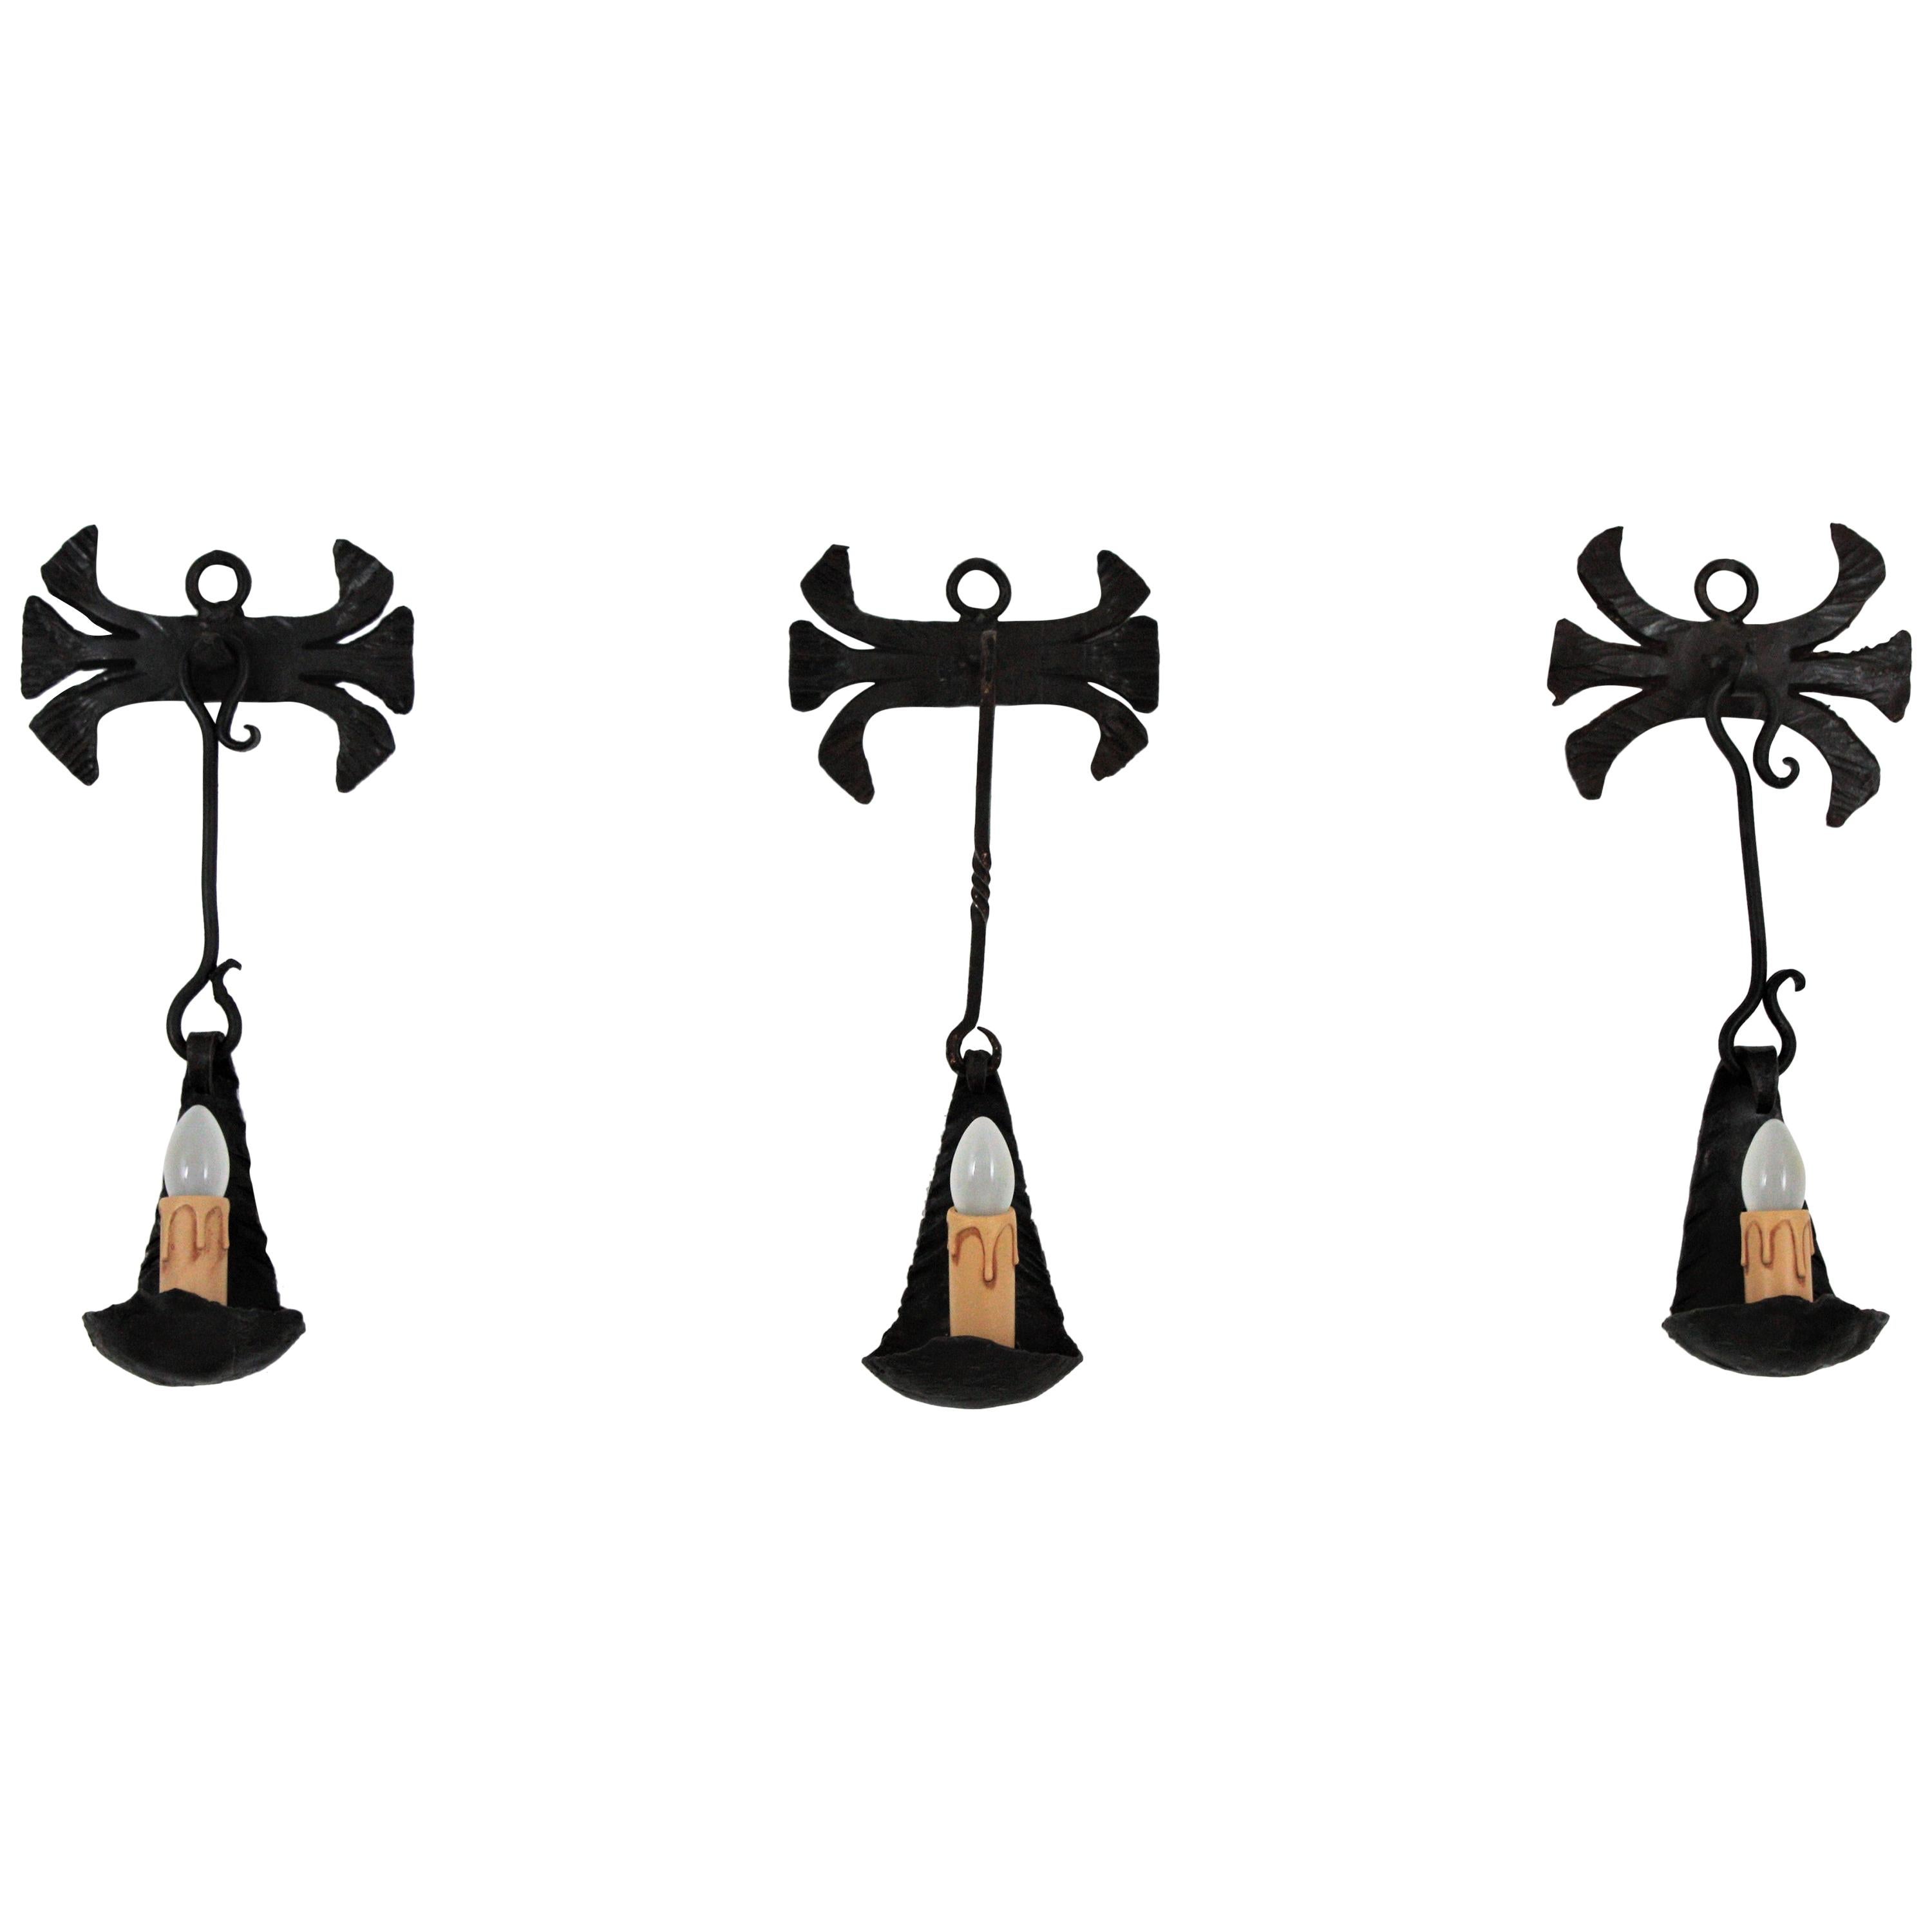 Set of three Gothic style candleholder oil lamps converted into wall sconces, Spain, 1930s-1940s.
Each of these three wall lights were all made by hand in wrought iron. Created to be wall oil lamps or wall candleholders. We have converted them to